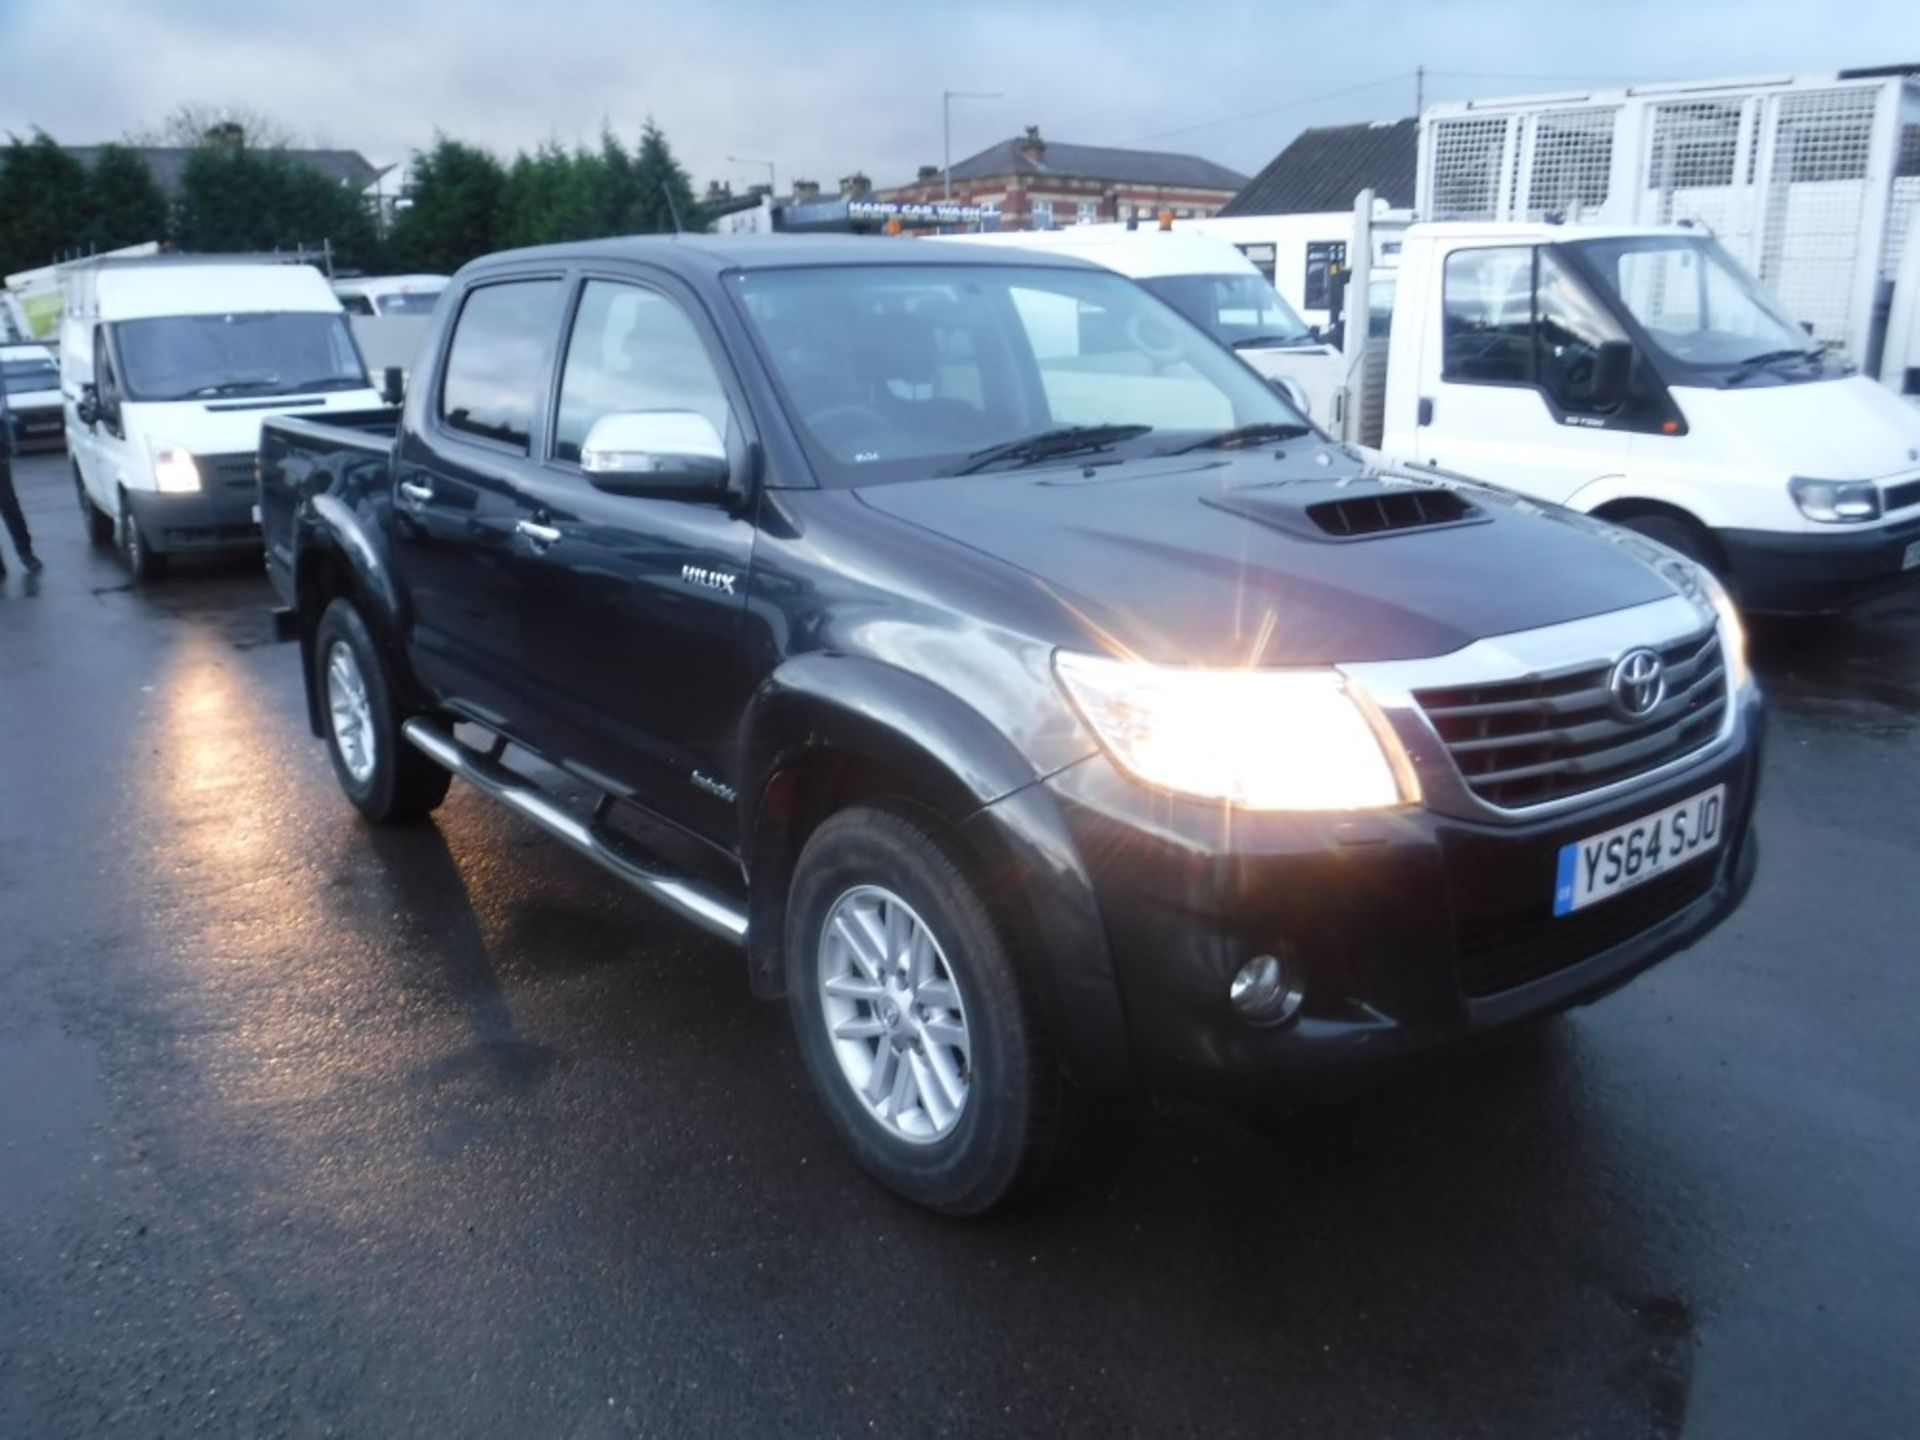 64 reg TOYOTA HI-LUX INVINCIBLE D-4D 4 X 4, 1ST REG 12/14, 48121M WARRANTED, V5 HERE, 1 OWNER FROM